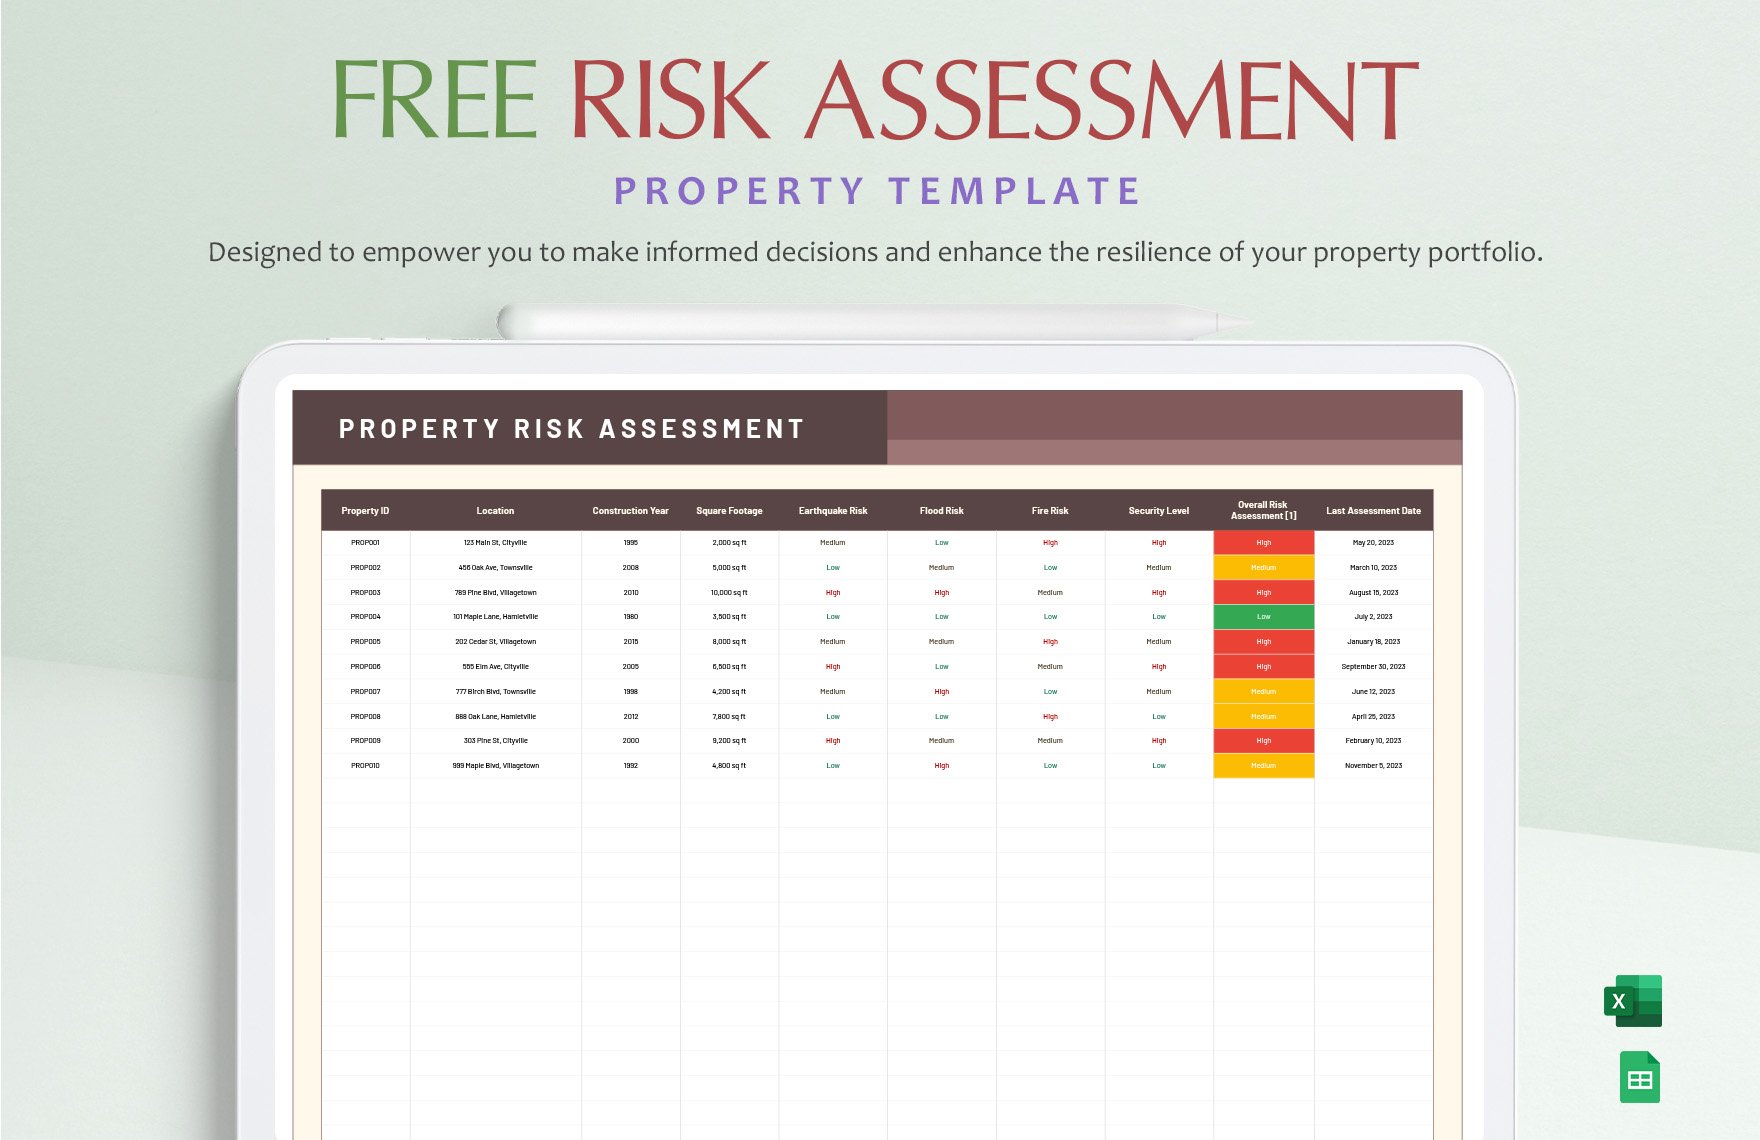 Free Risk Assessment Property Template in Excel, Google Sheets